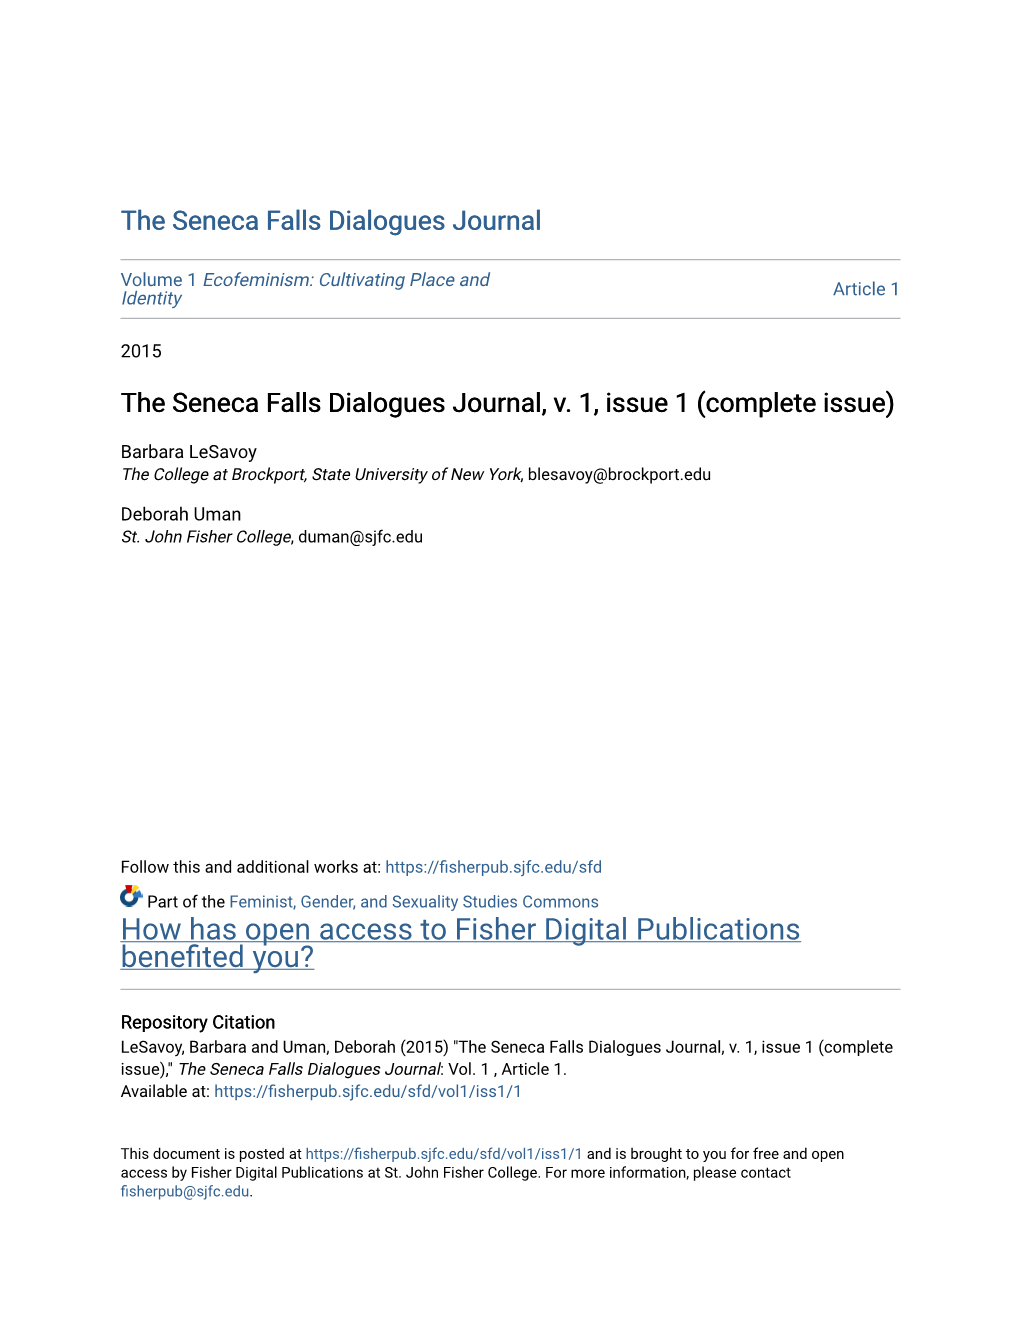 The Seneca Falls Dialogues Journal, V. 1, Issue 1 (Complete Issue)